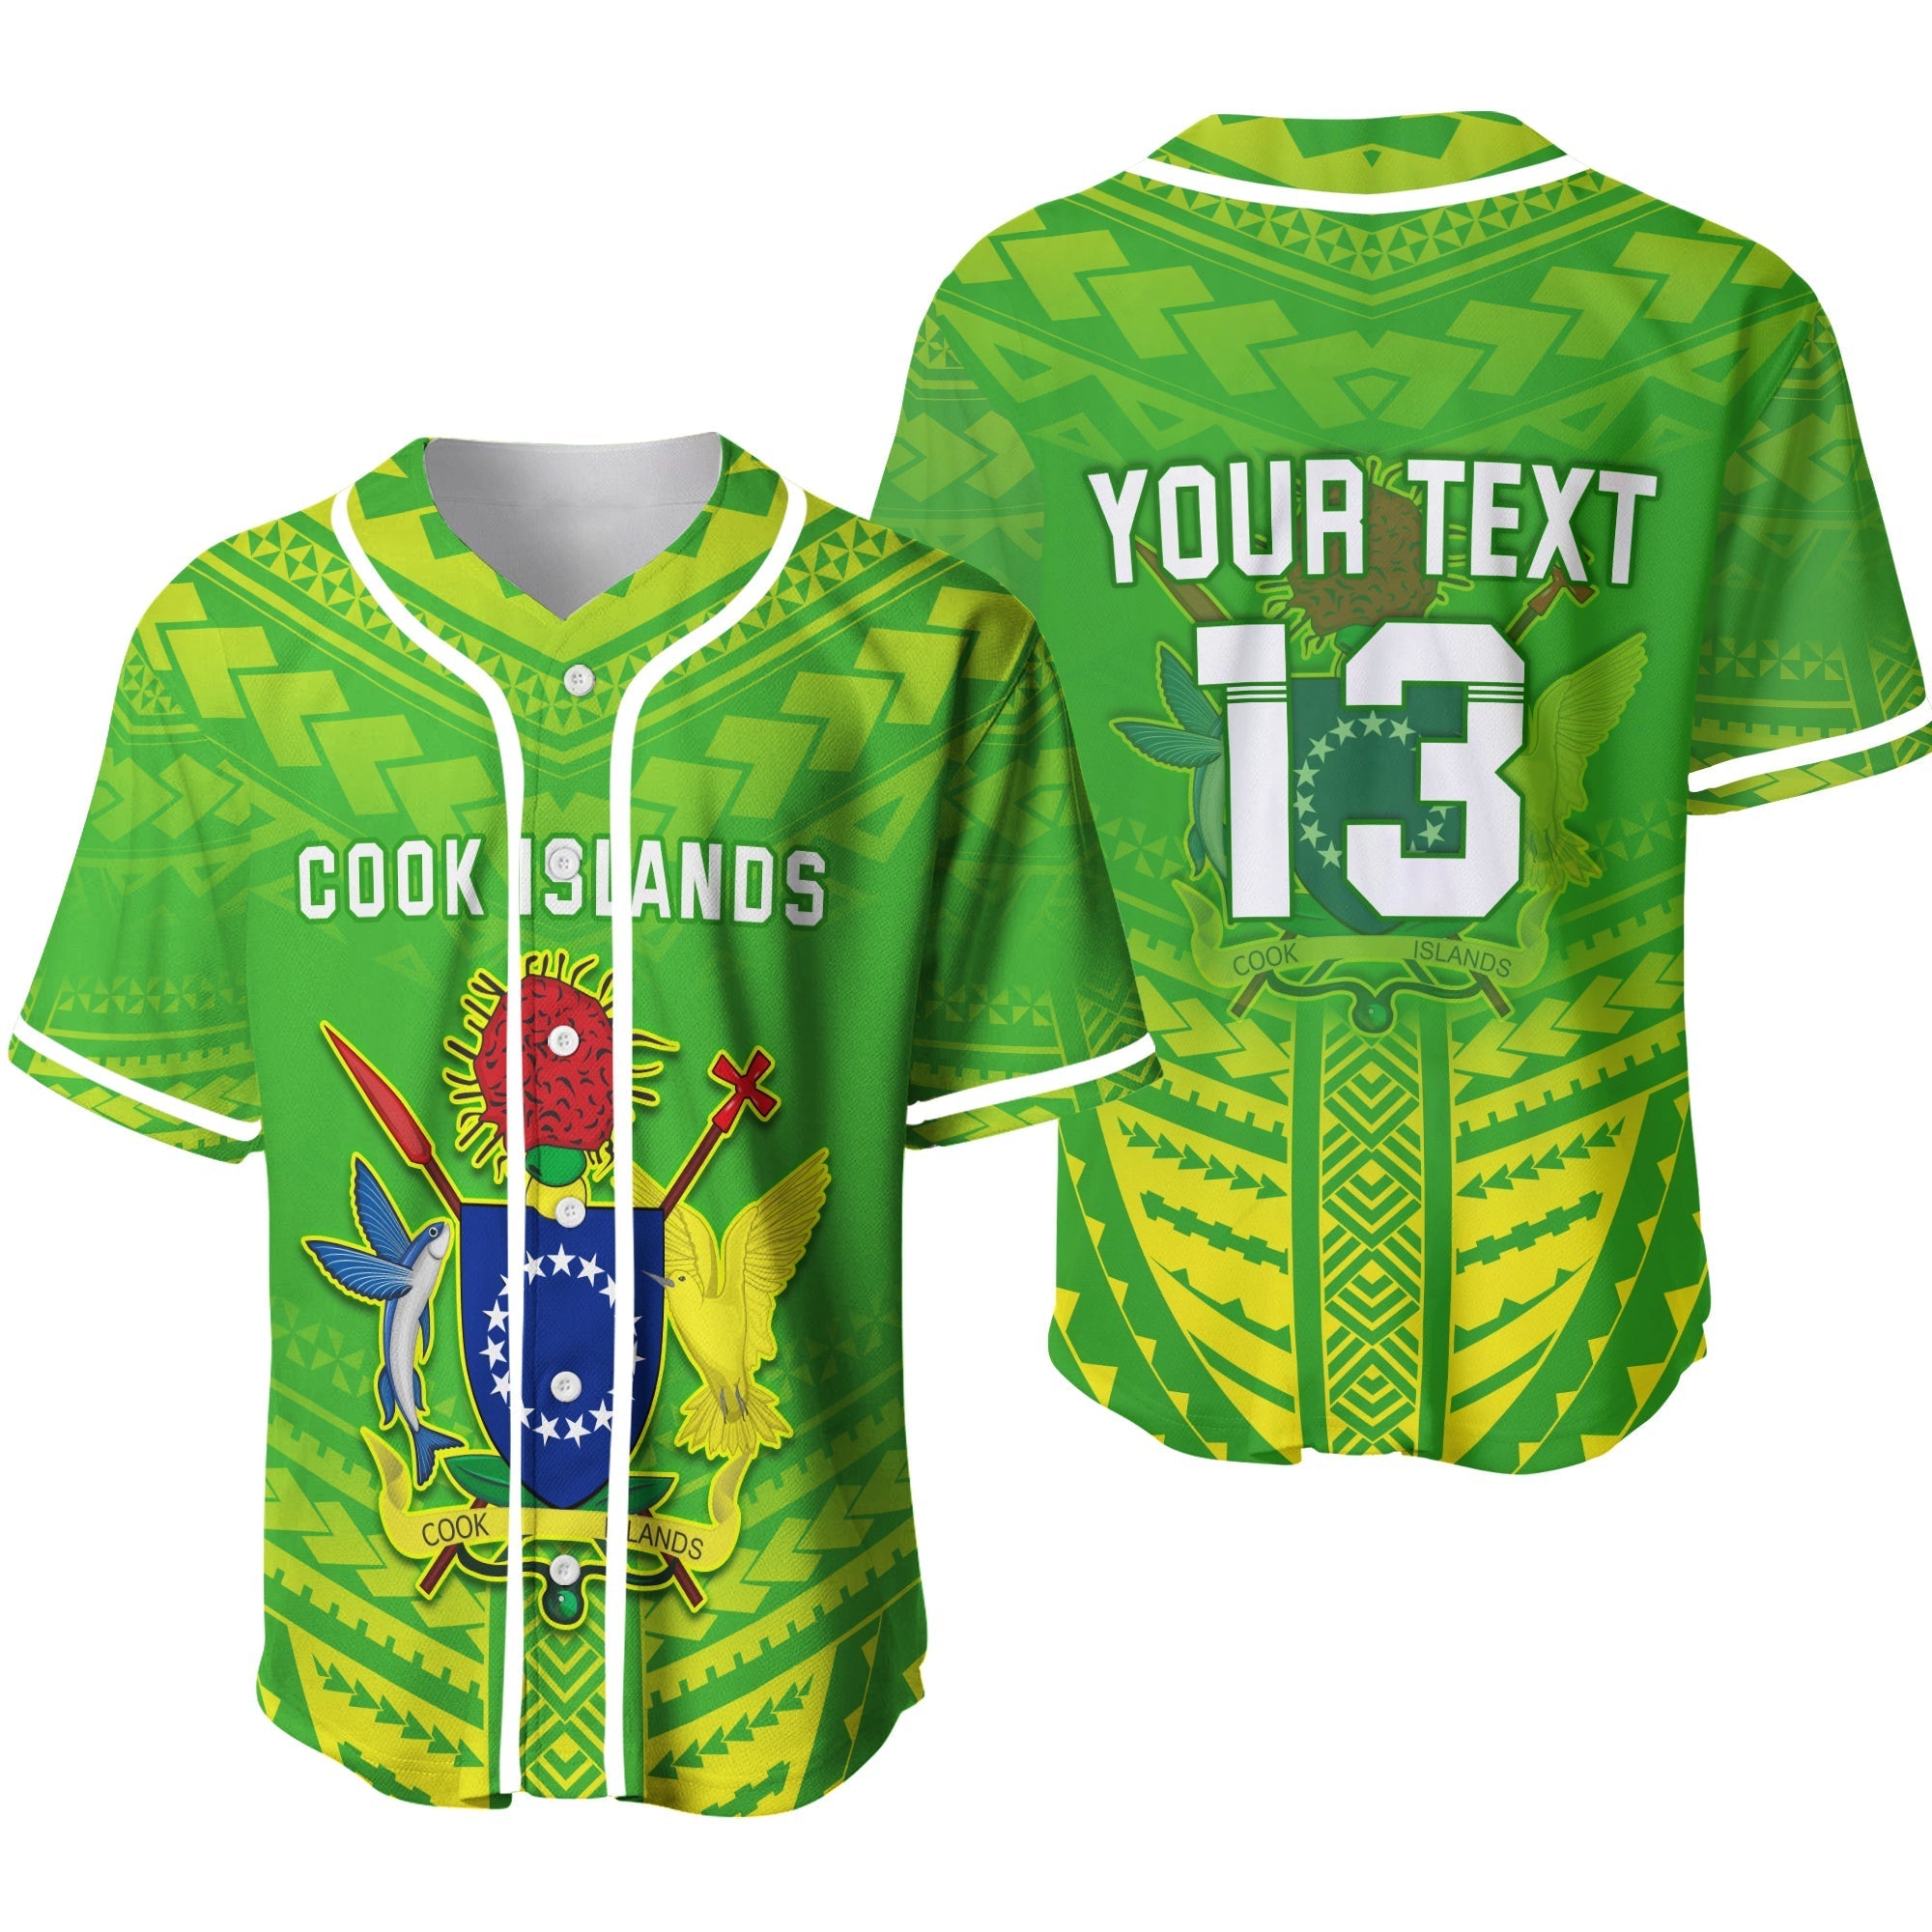 custom-personalised-cook-islands-baseball-jersey-fresh-life-02-custom-text-and-number